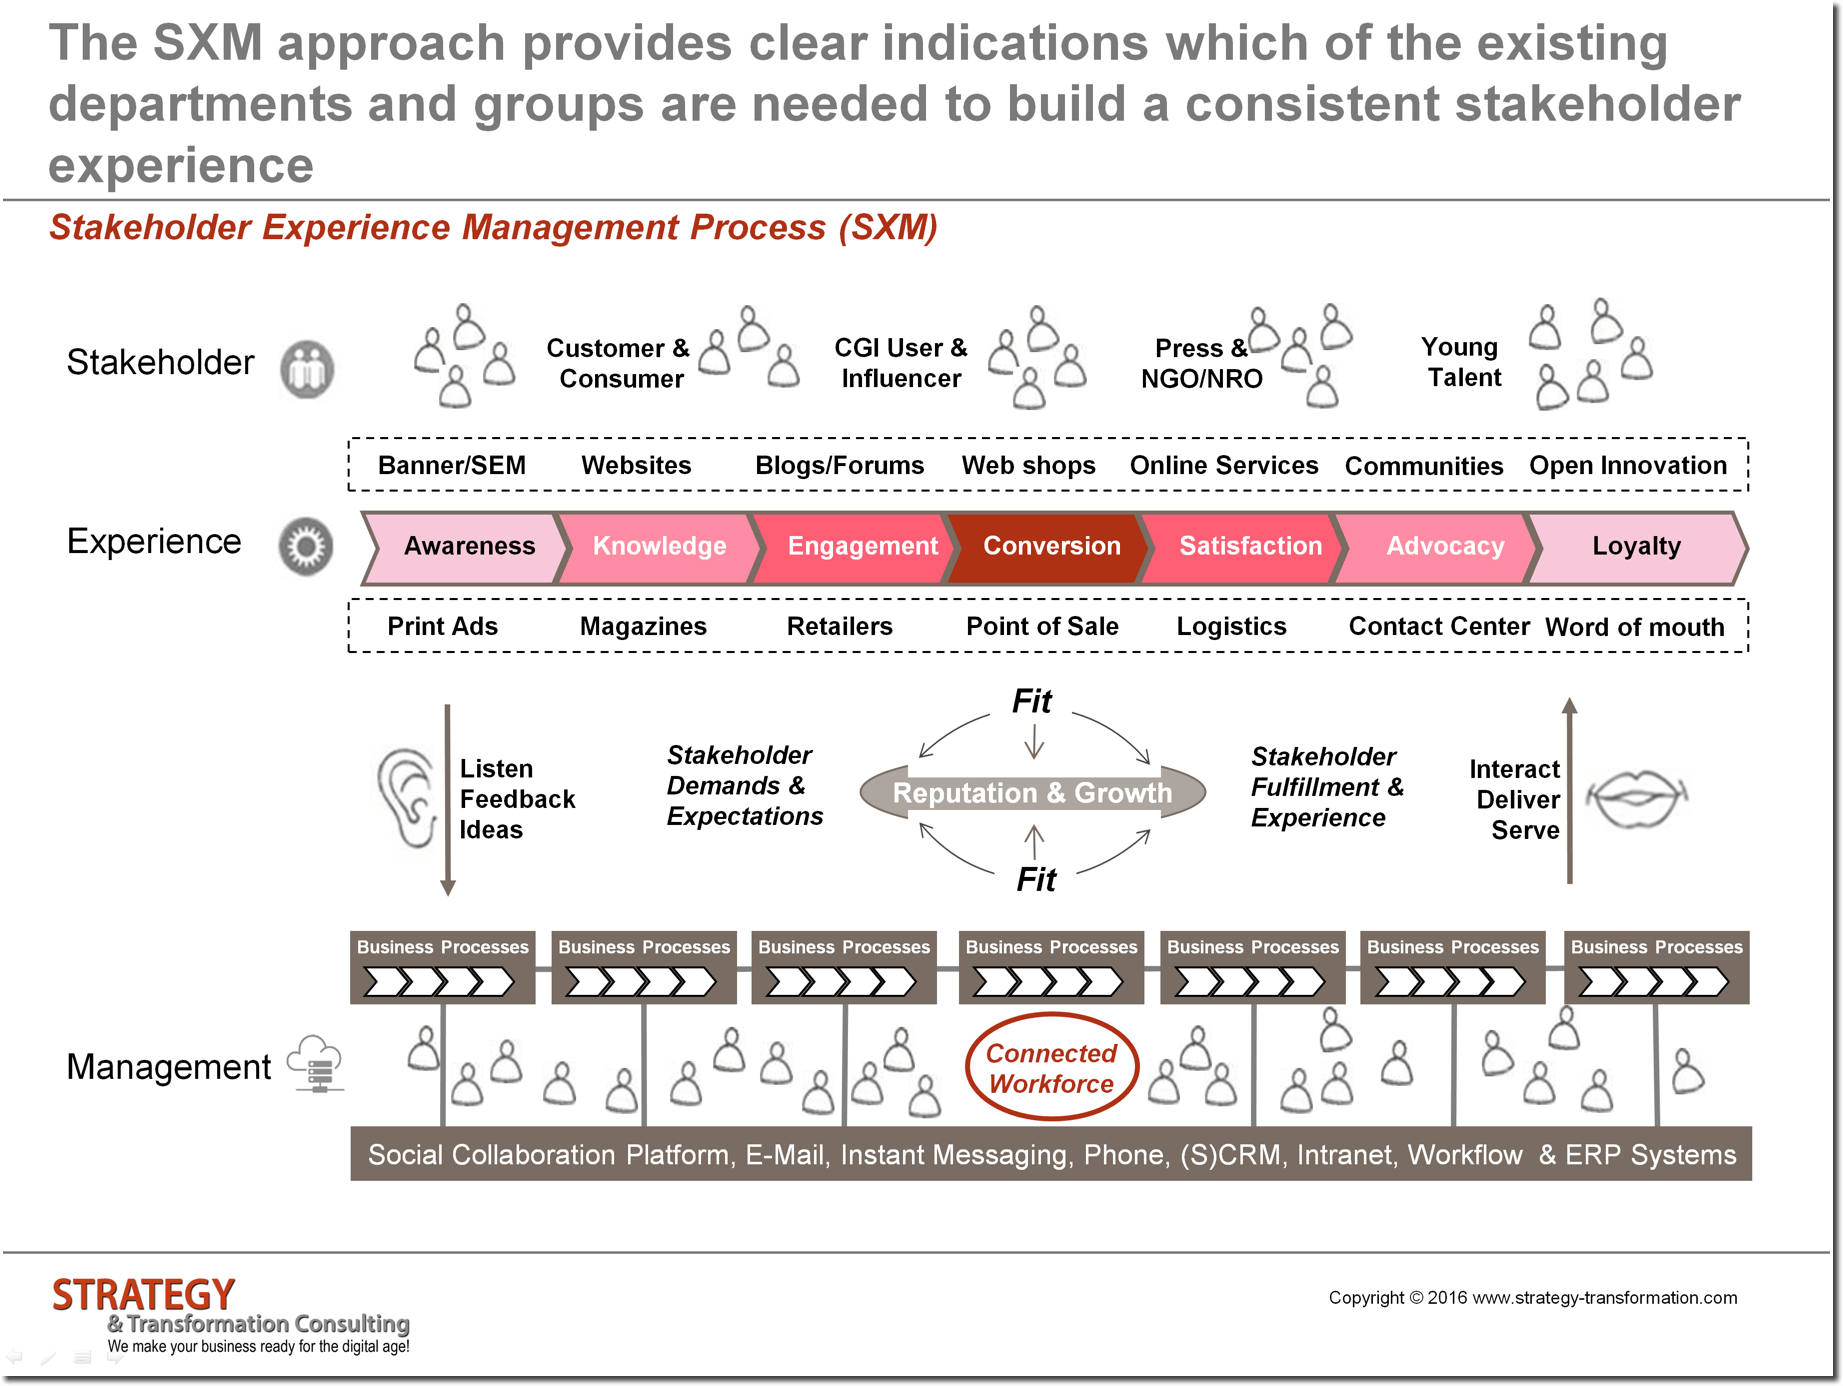 Stakeholder Experience Management Process (SXM)